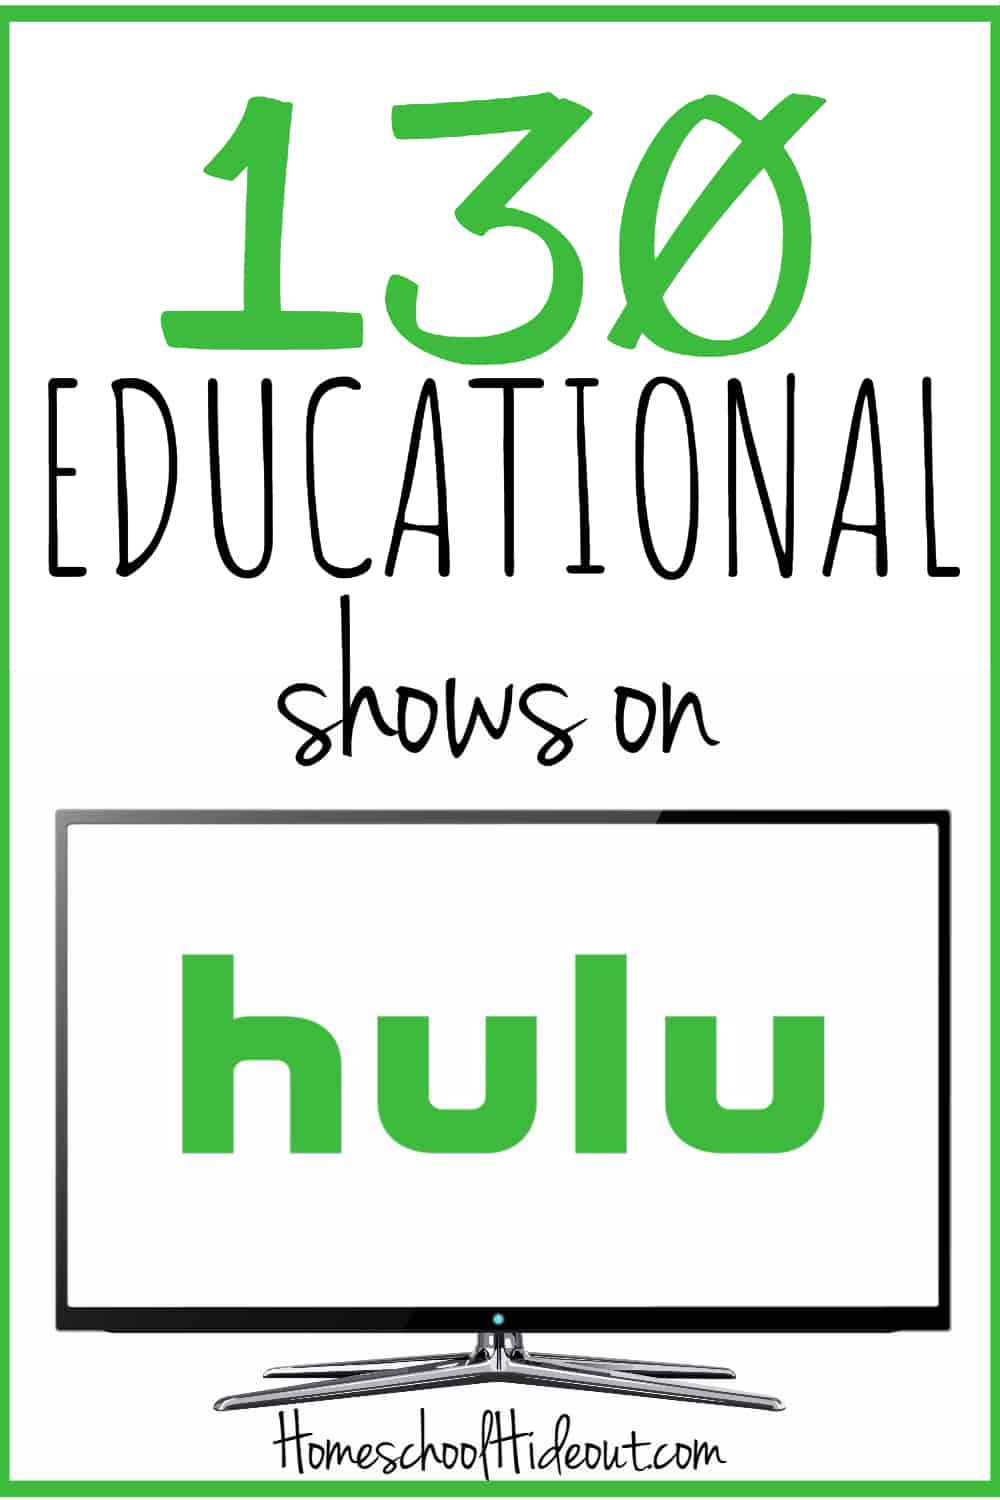 100 educational shows on Hulu that you just can't miss! #educational #homeschool #technology #hulu #onlinelearning